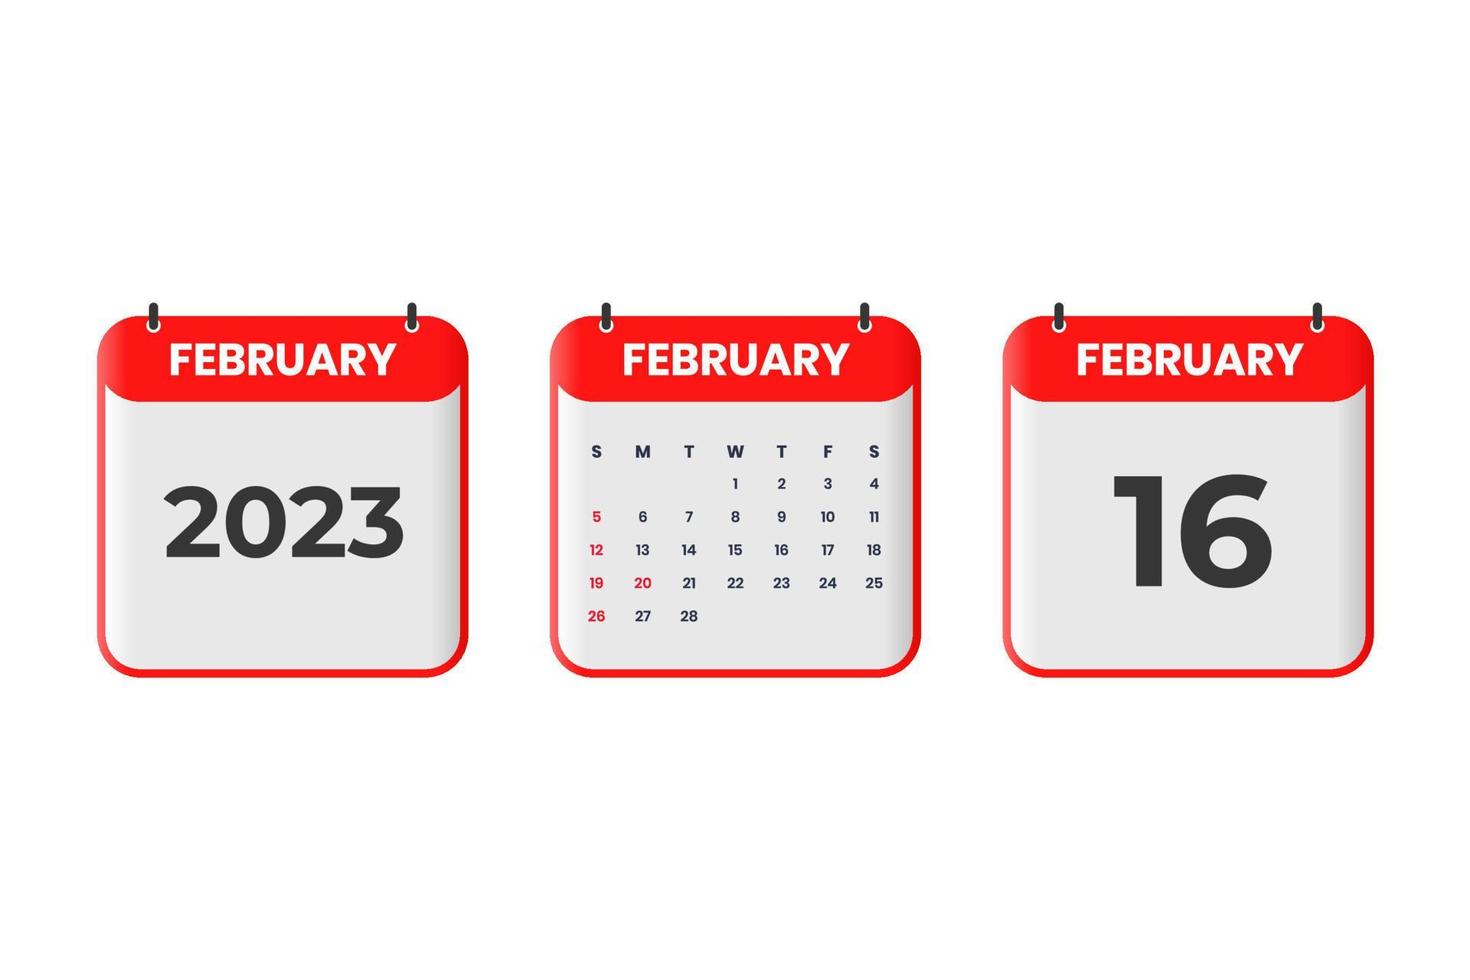 February 2023 calendar design. 16th February 2023 calendar icon for schedule, appointment, important date concept vector